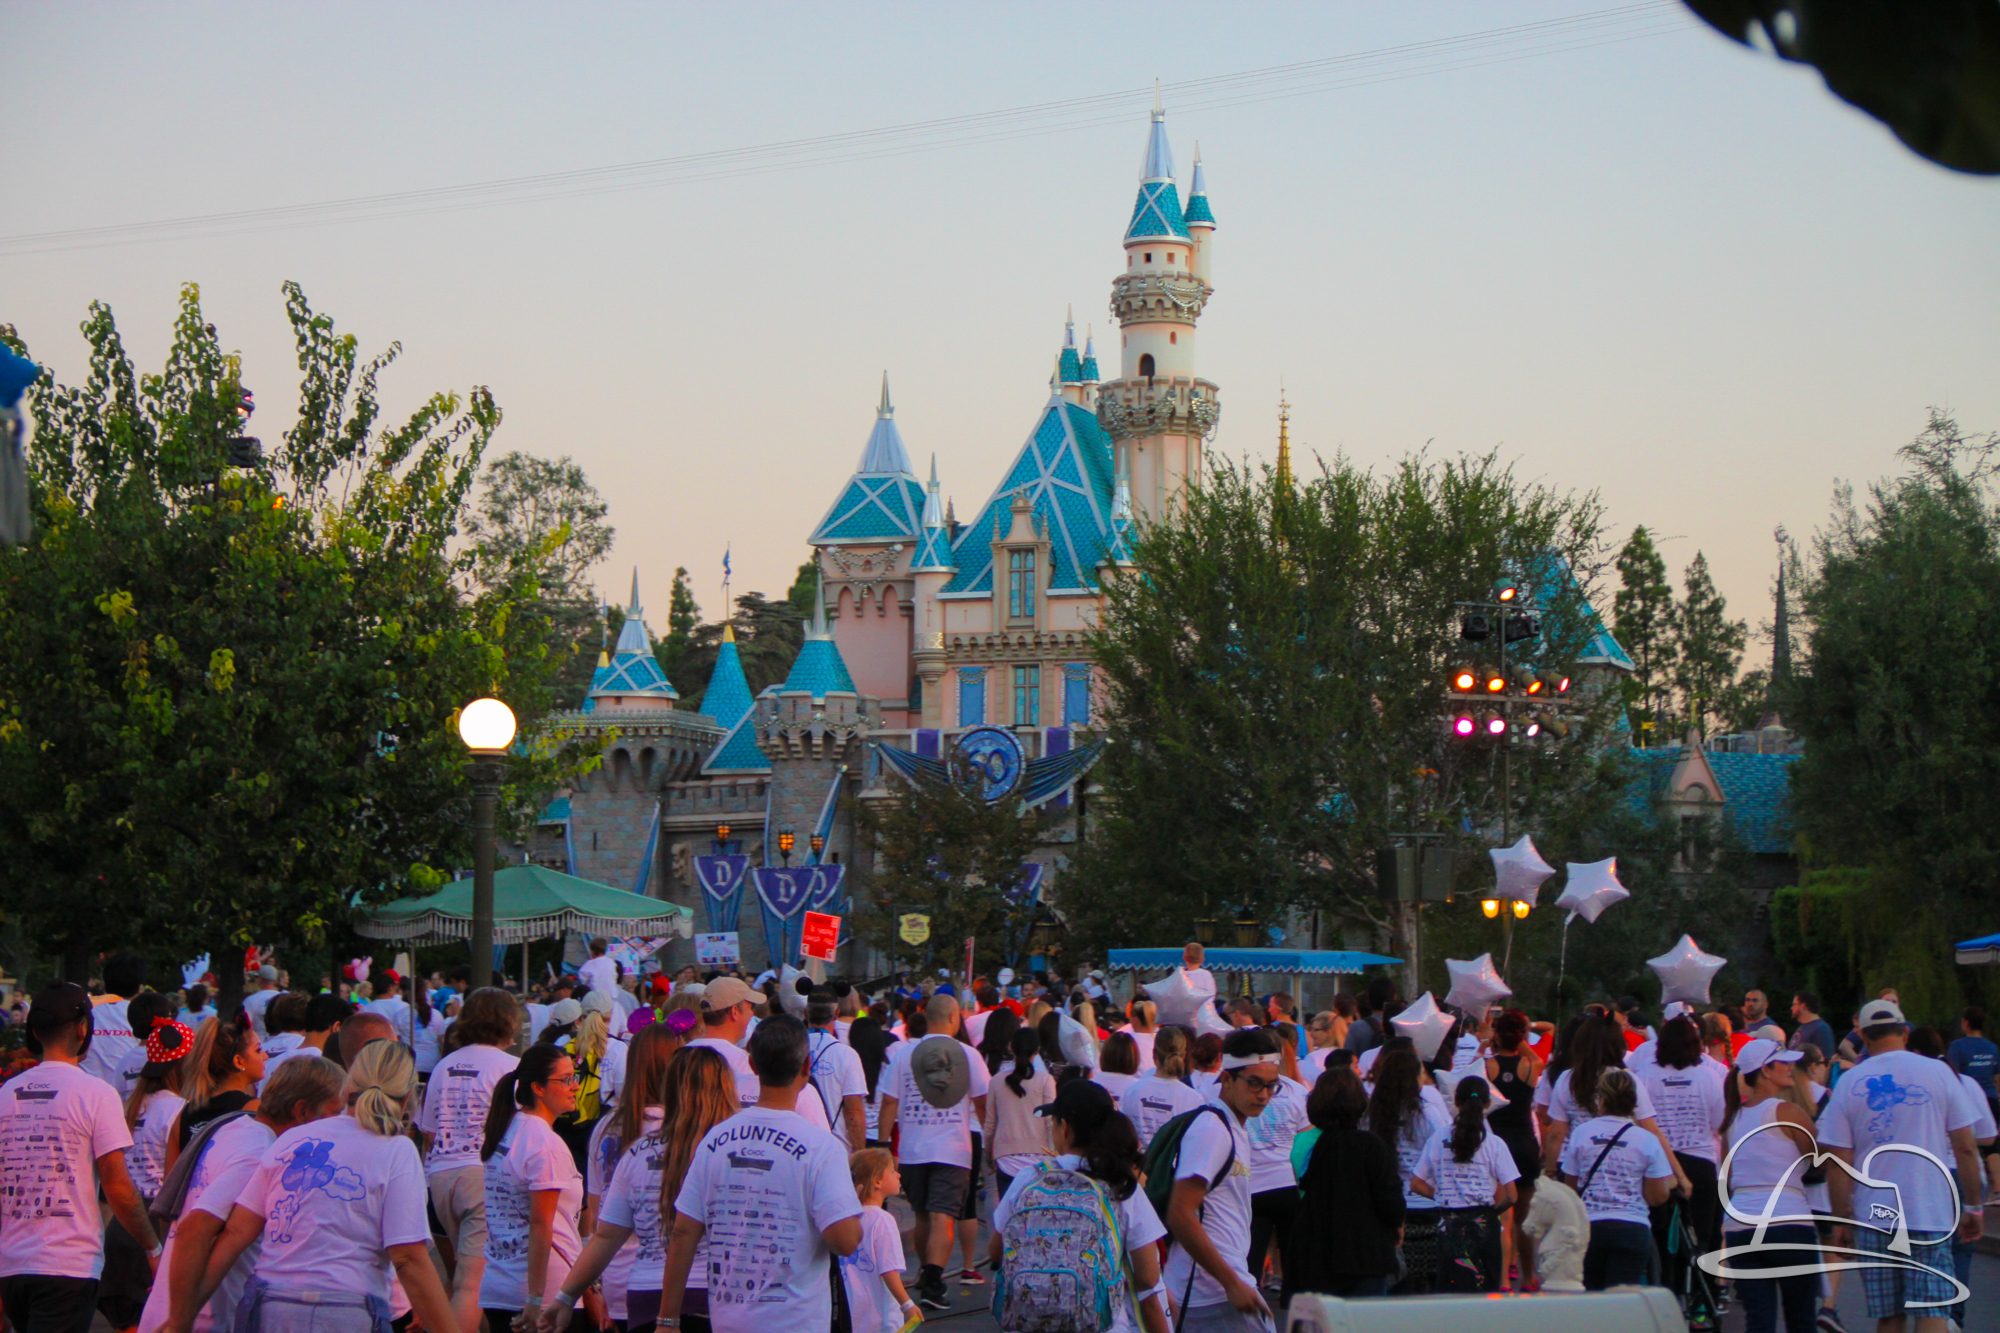 Join Team DAPs Magic for the 2017 CHOC Walk in the Park at the Disneyland Resort!